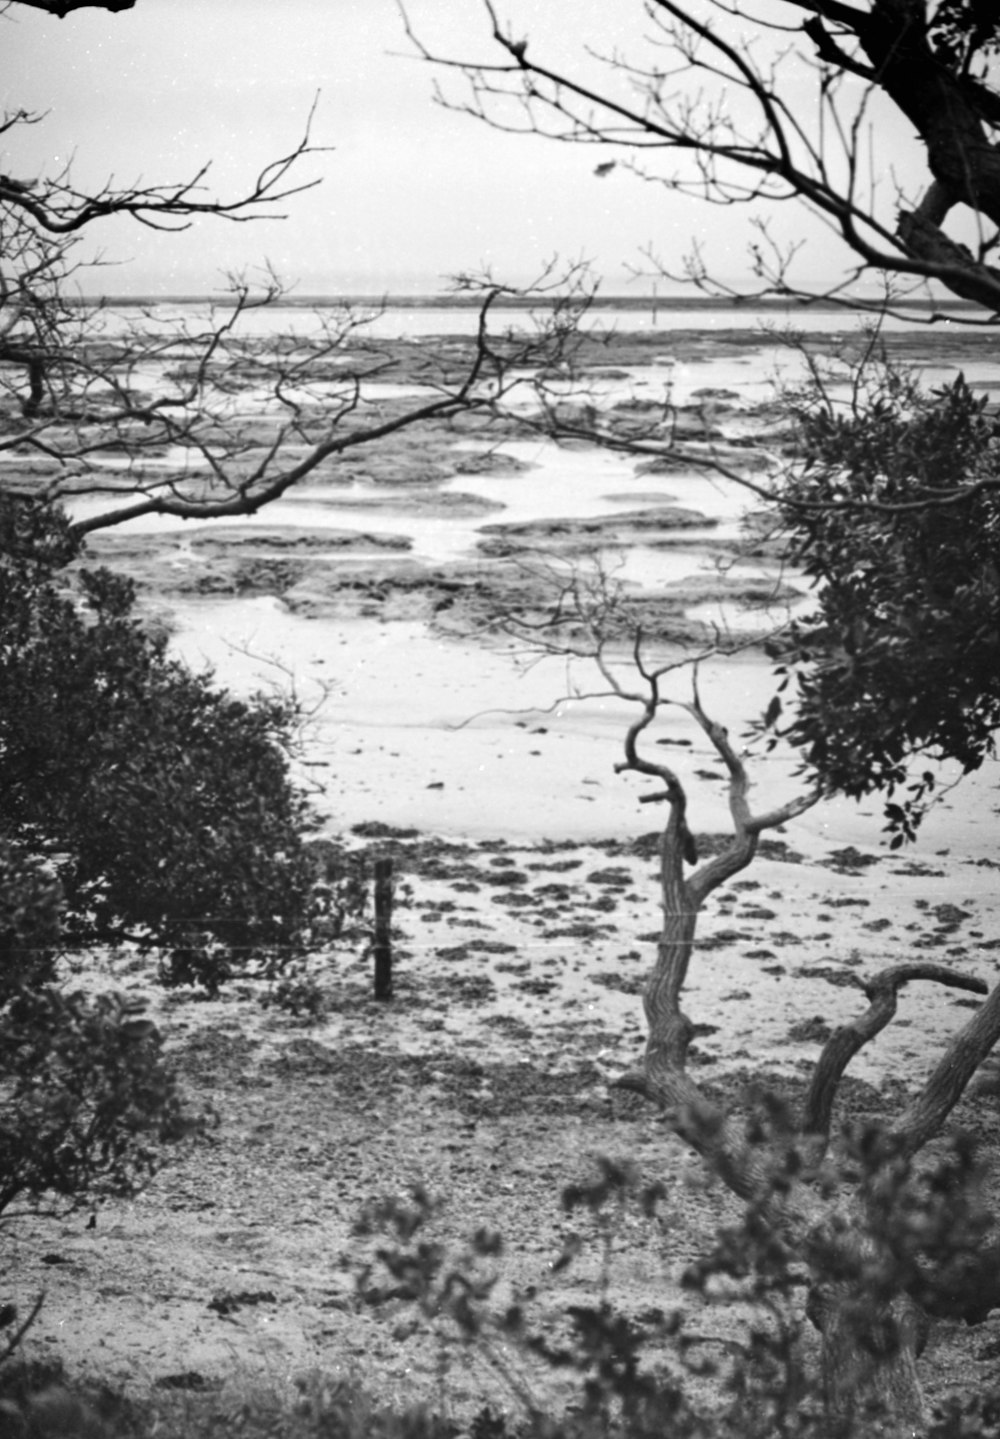 a black and white photo of a beach and trees